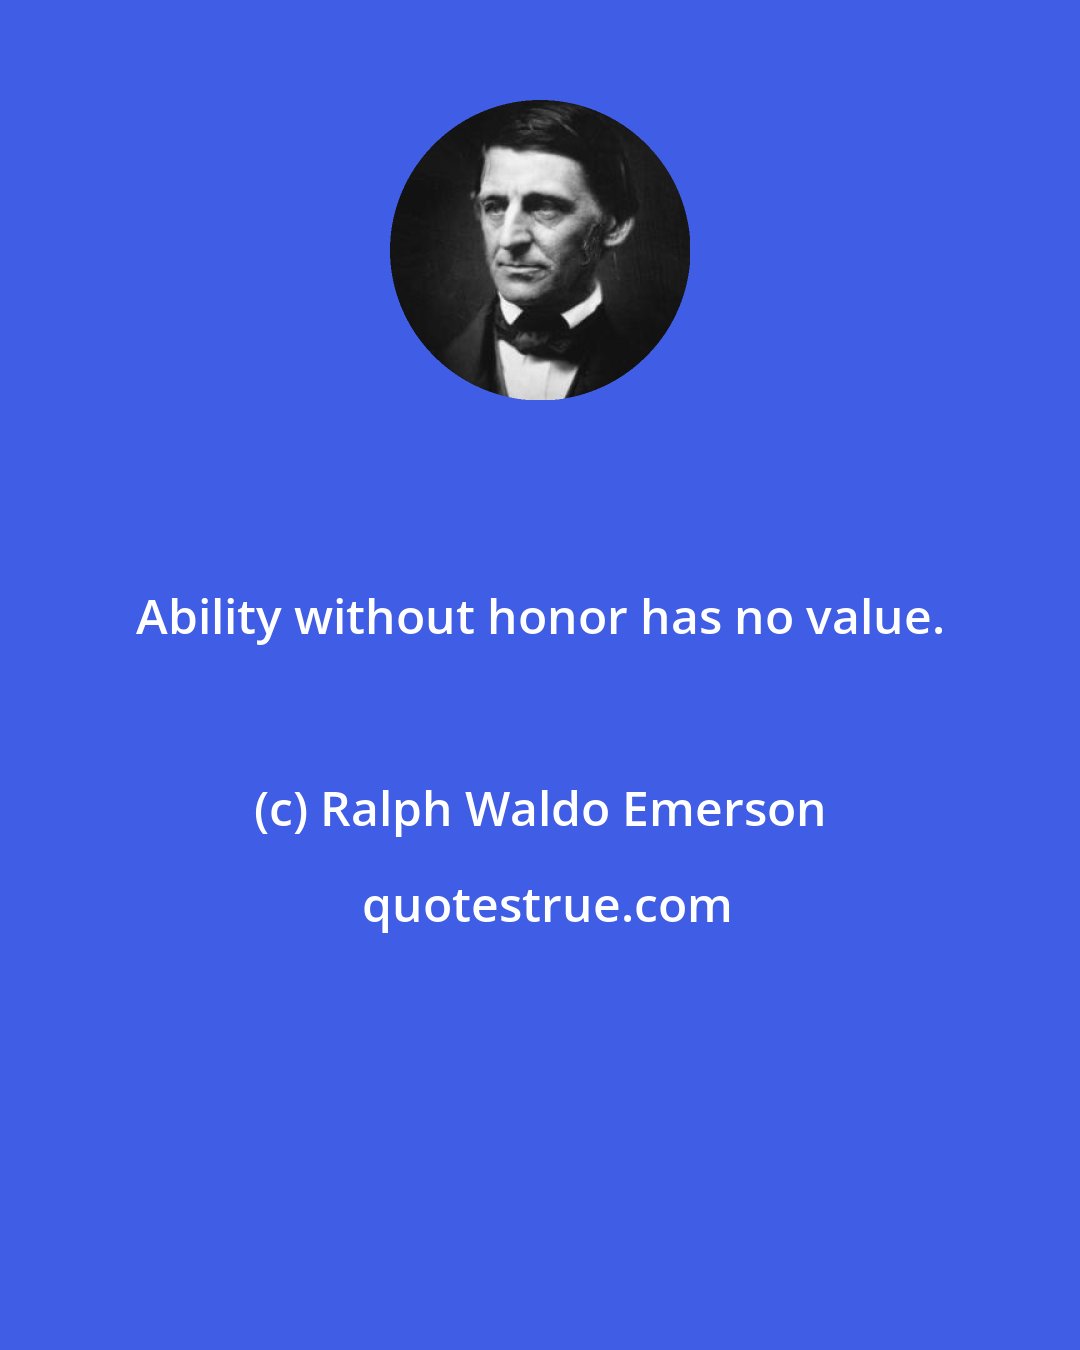 Ralph Waldo Emerson: Ability without honor has no value.